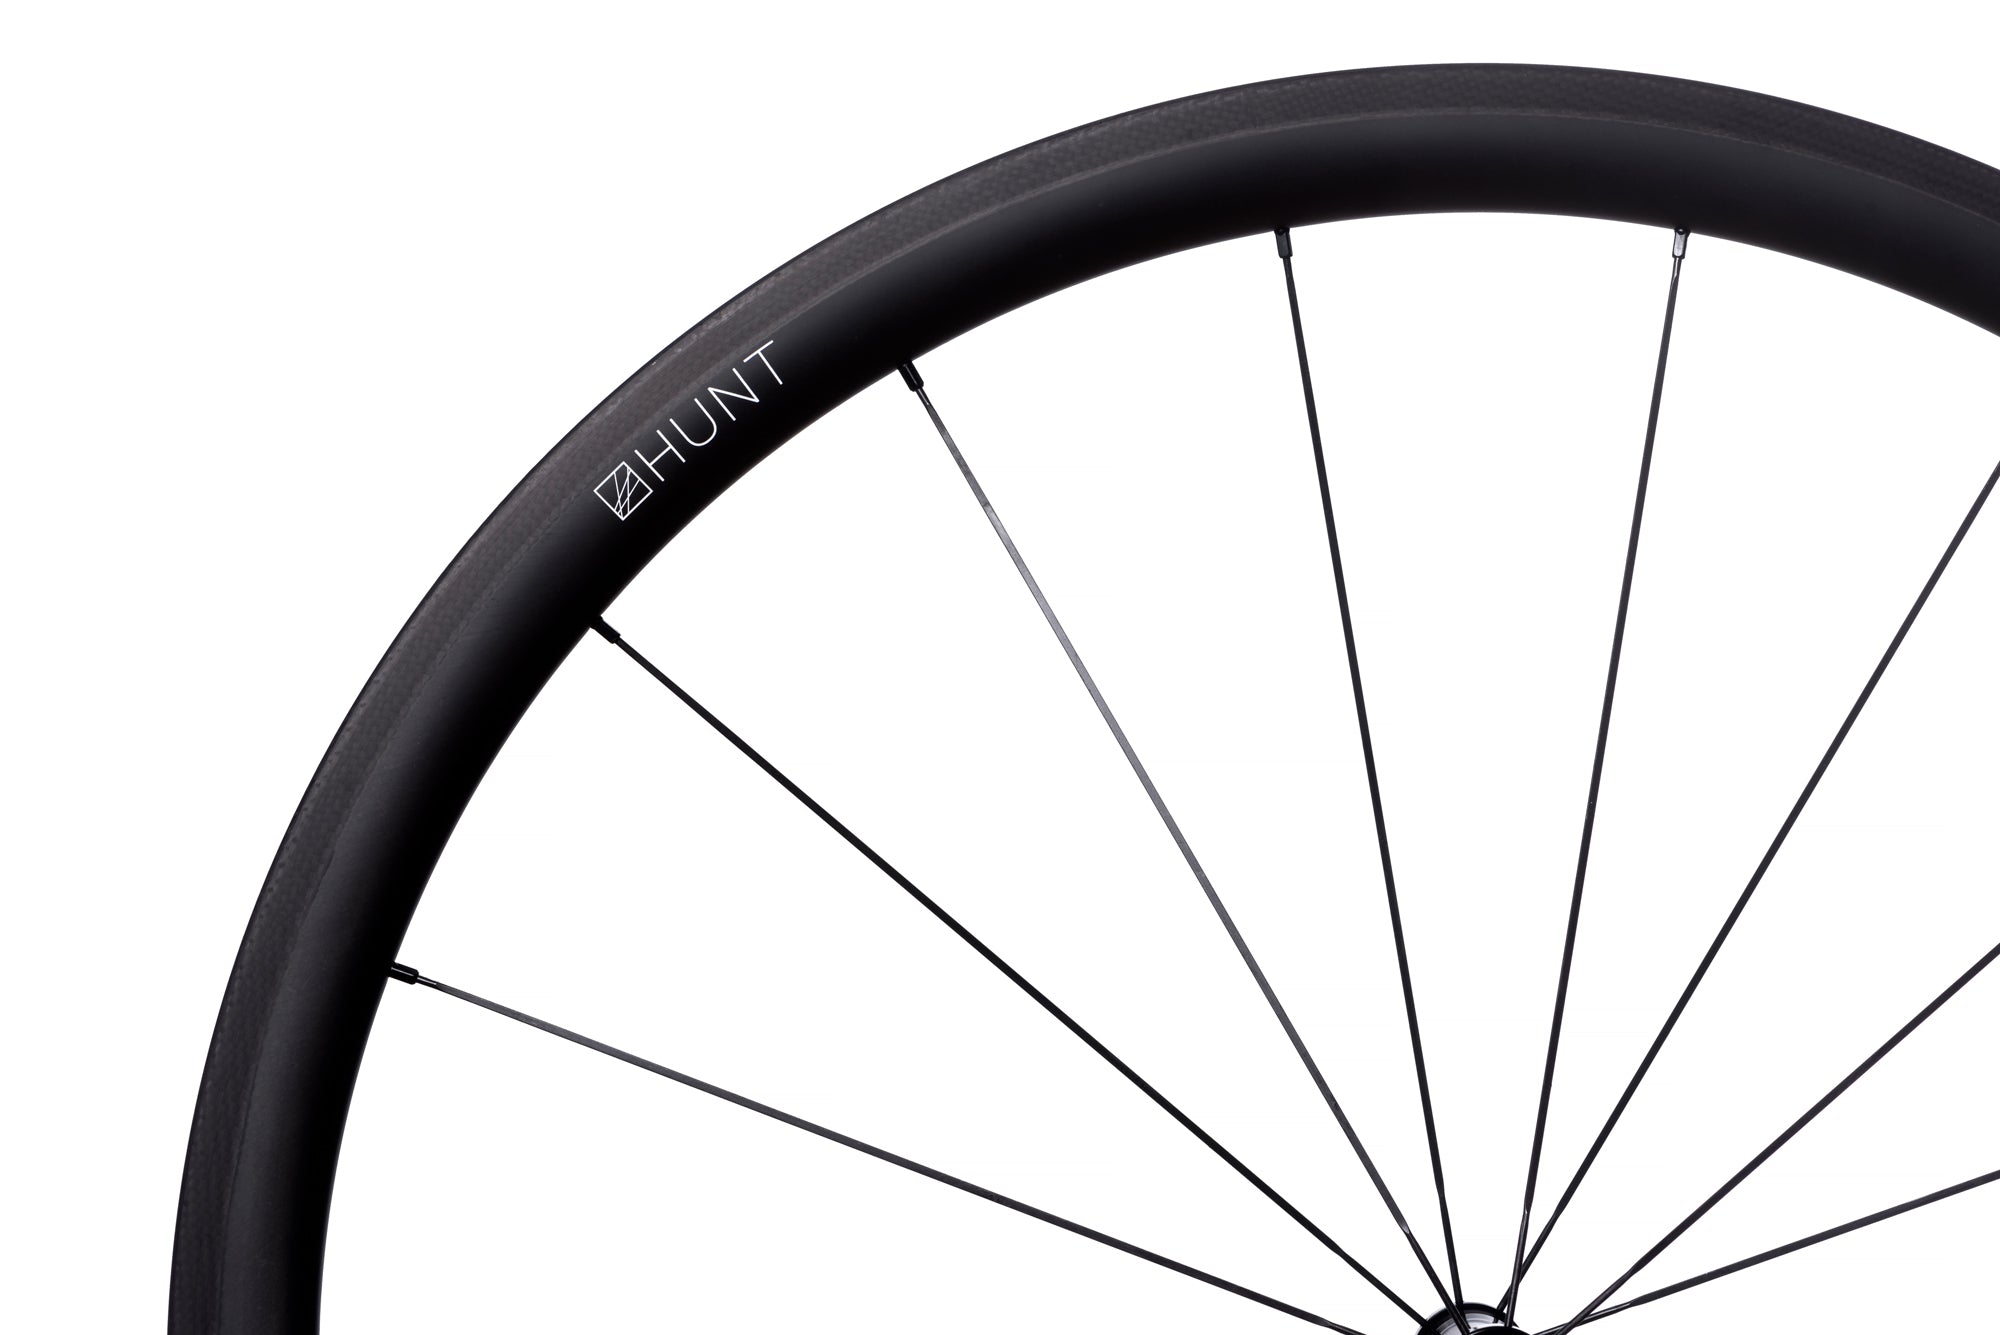 <h1>Spokes</h1><i>We chose the top-of-the-range Pillar Spoke Re-enforcement PSR XTRA models. These butted blade aero spokes are lighter and provide a greater degree of elasticity to maintain tensions longer and add fatigue resistance. PSR spokes feature the 2.2 width at the head providing more material in this high stress area. Nipples are 14mm alloy, anodized and come with a hex head so you can achieve precise tensioning. Combining components well is key which is why all Hunt wheels are hand-built.</i>